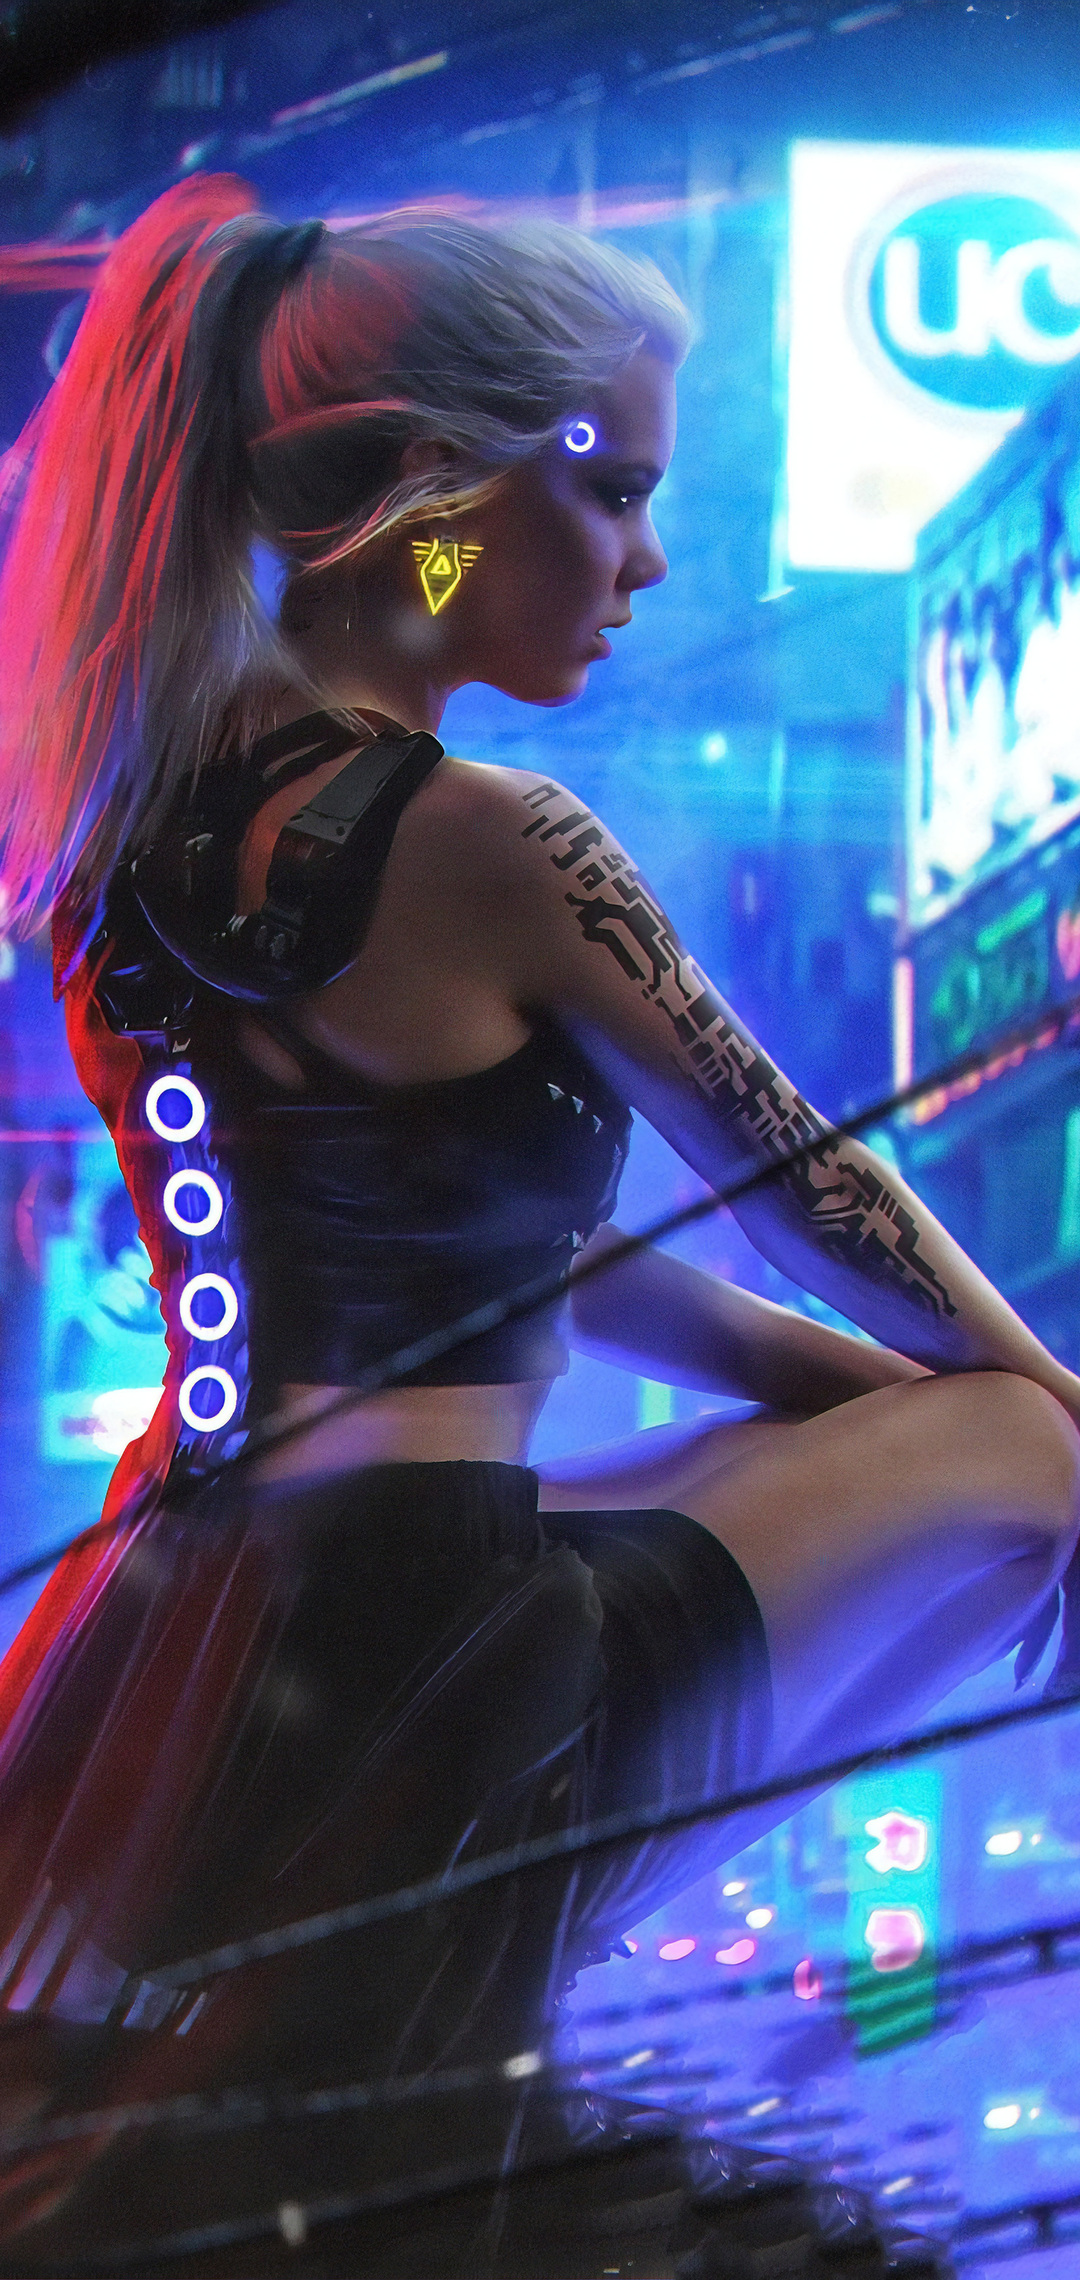 1080x2280 Cyberpunk Neon Girl 4k One Plus 6,Huawei p20,Honor view 10,Vivo  y85,Oppo f7,Xiaomi Mi A2 HD 4k Wallpapers, Images, Backgrounds, Photos and  Pictures